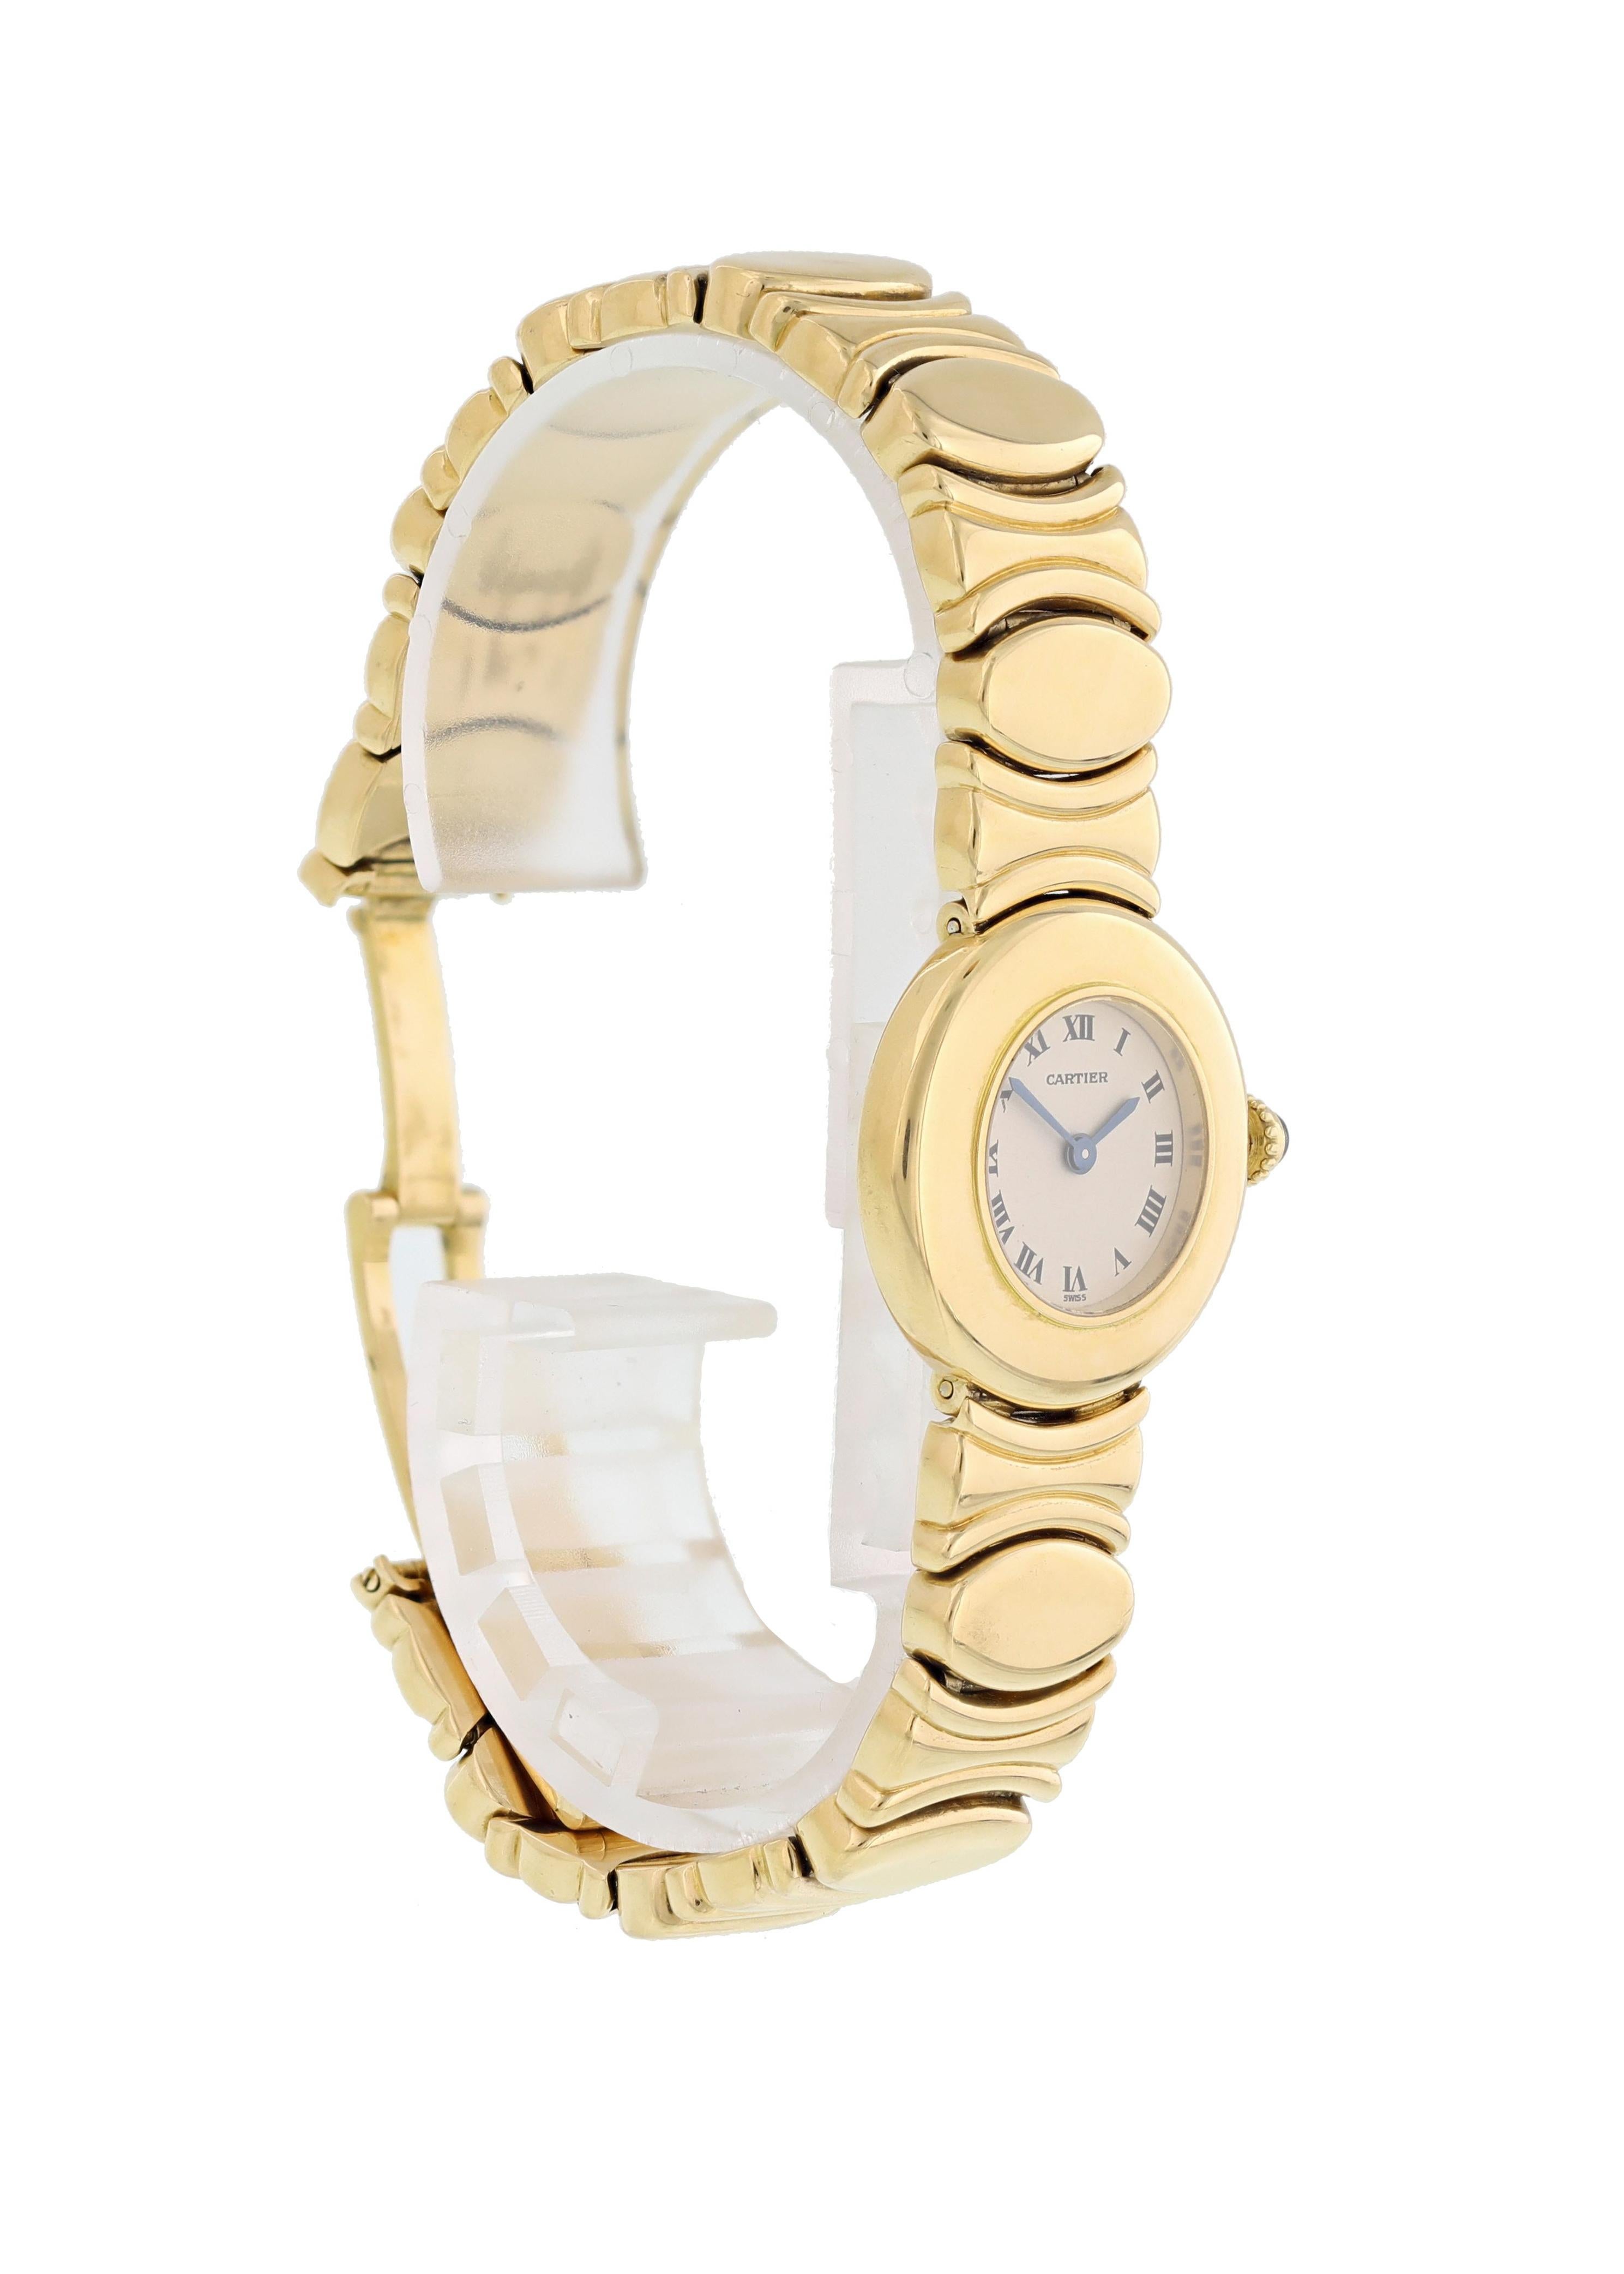 Cartier Baignoire 18 Karat Yellow Gold Ladies Watch In Excellent Condition For Sale In New York, NY